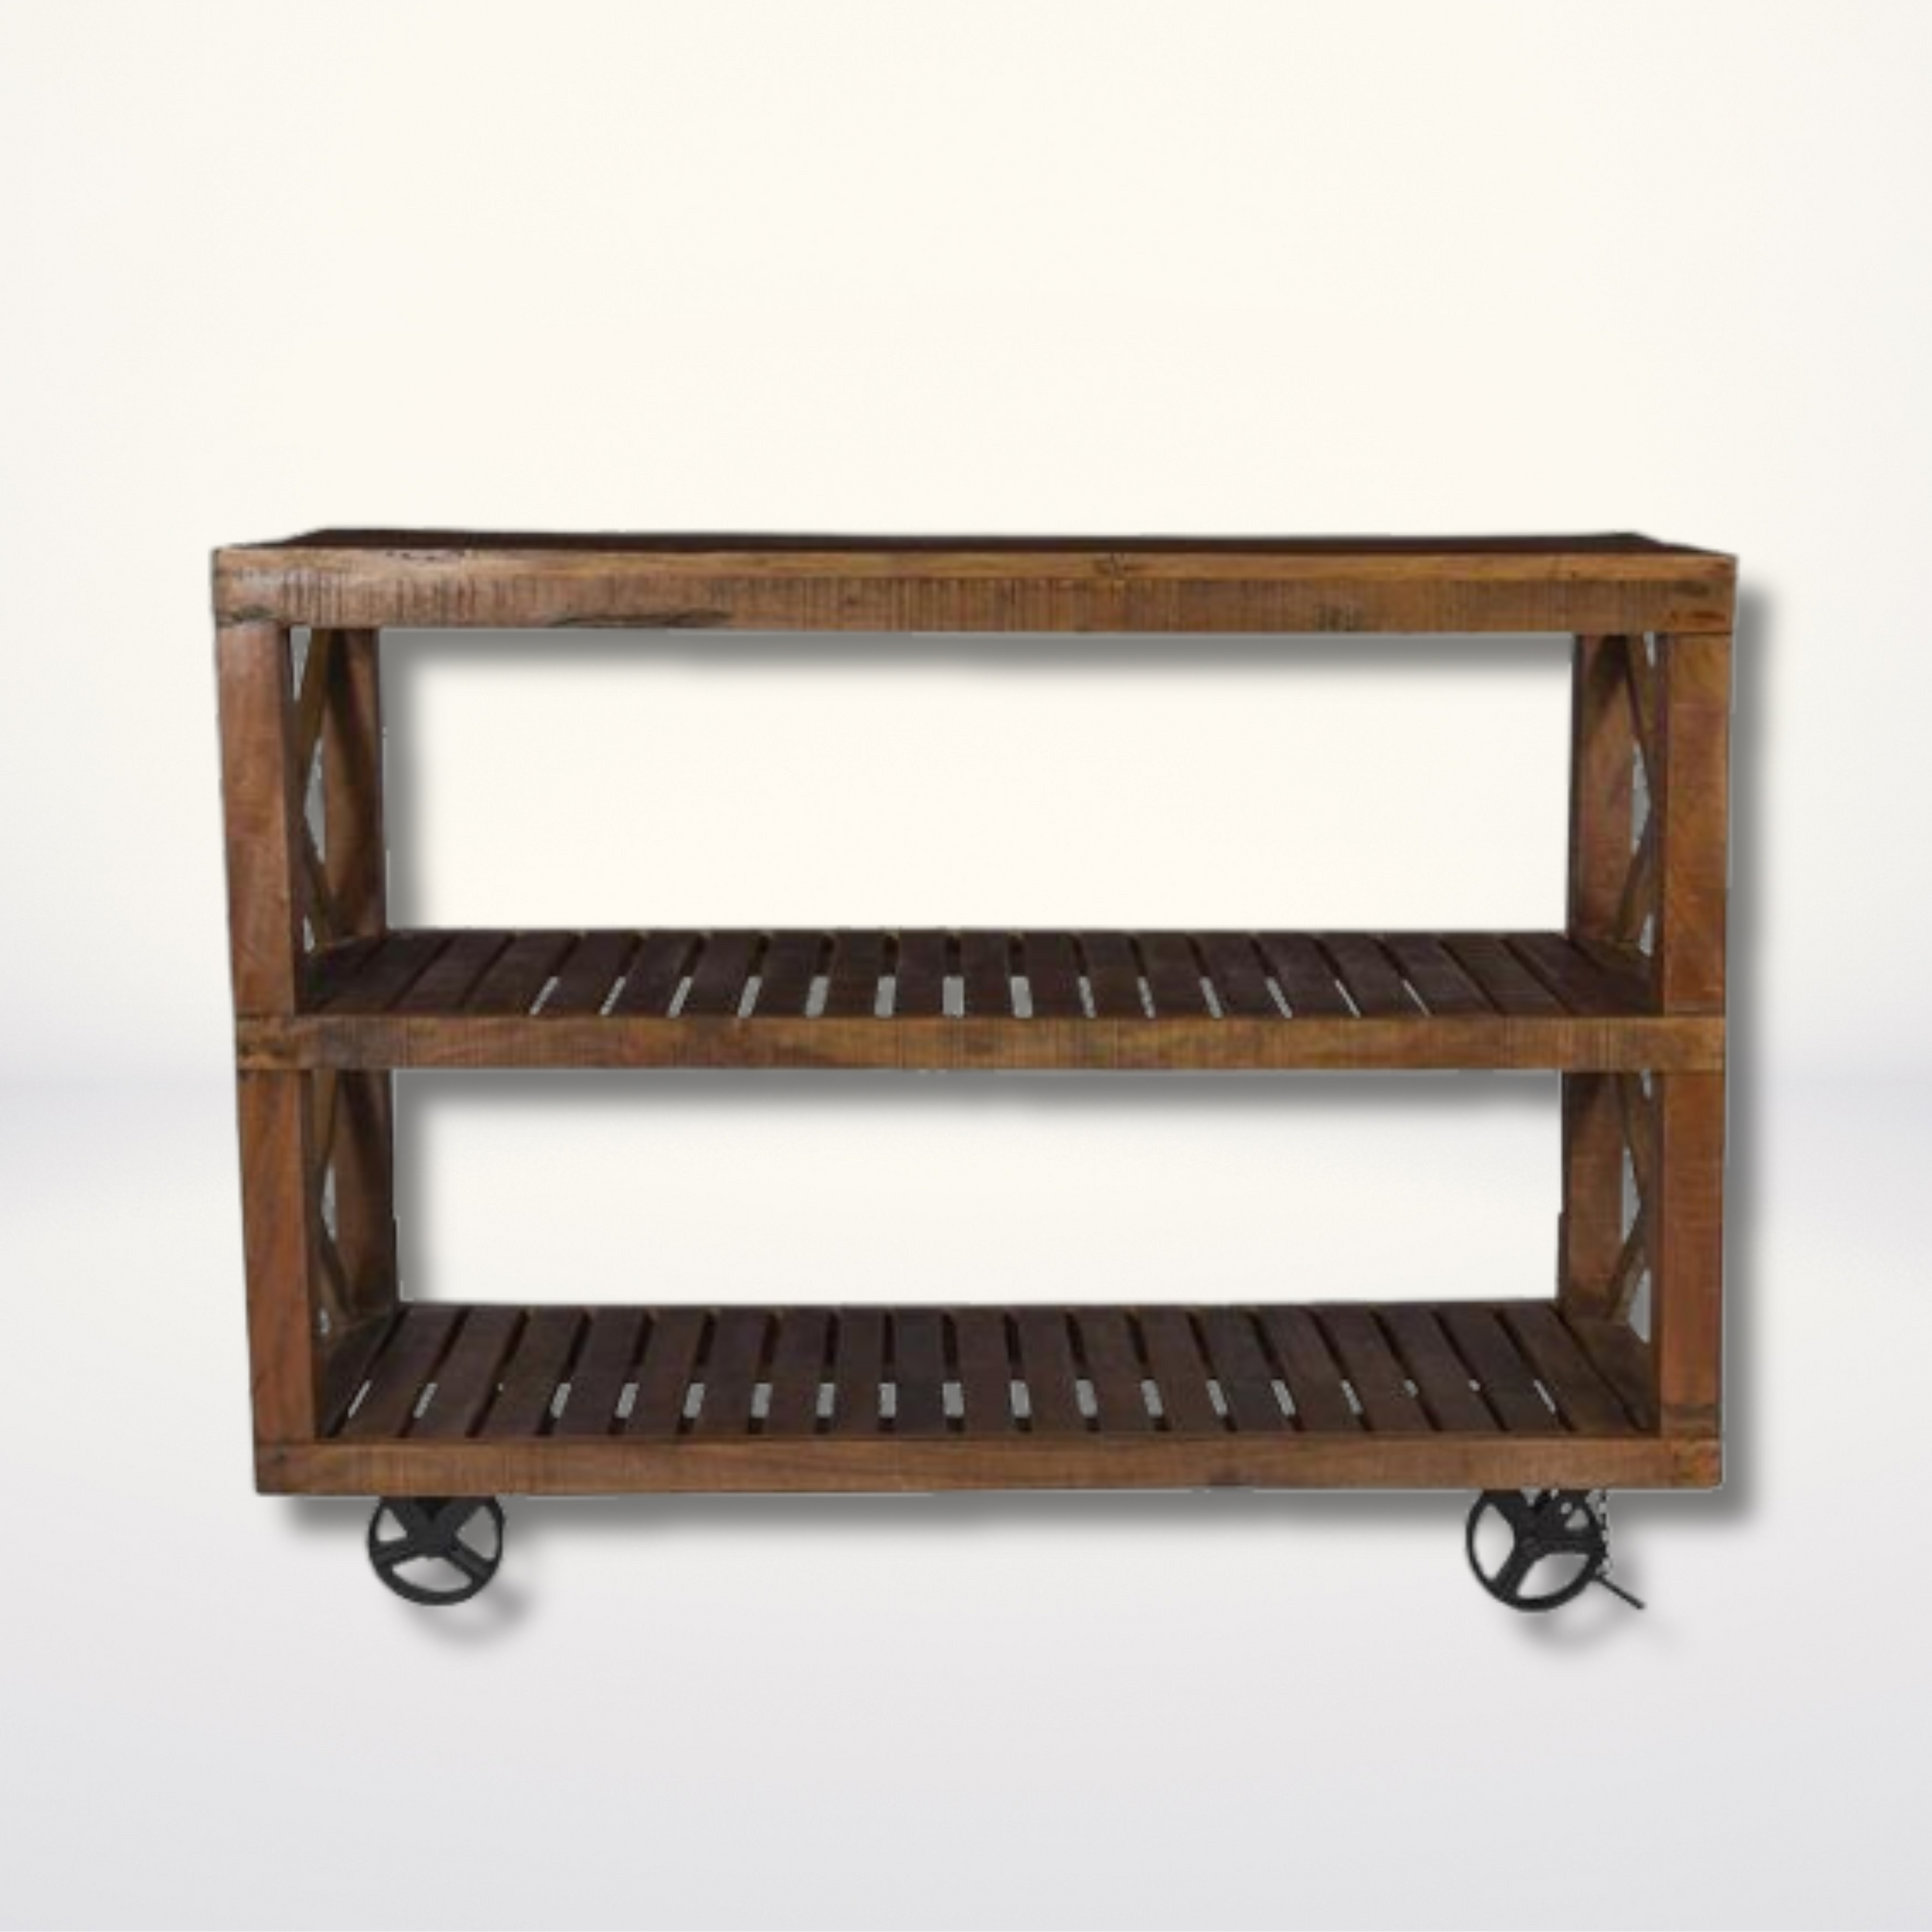 Multipurpose Industrial Console Table with Shelves and Wheels - Stylla London